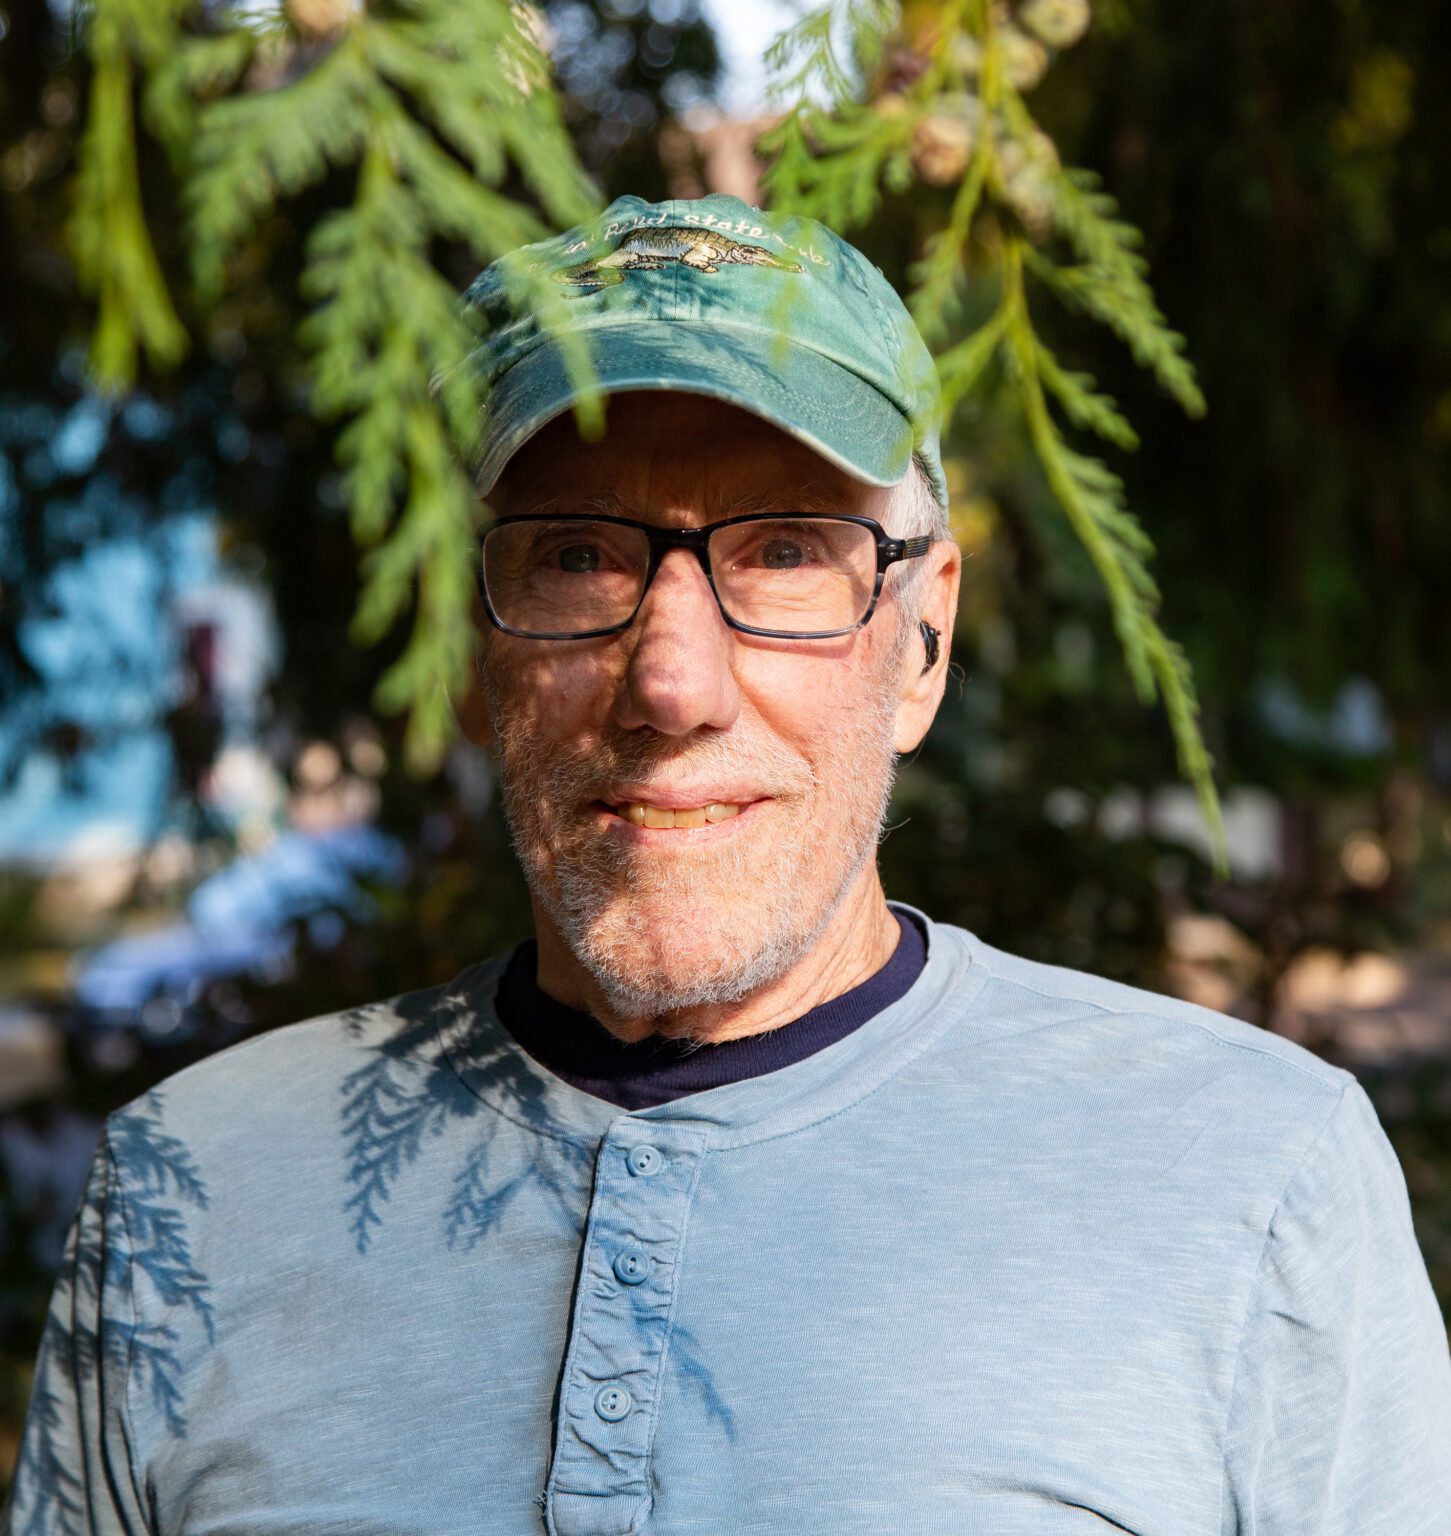 John Wesselink stands in the shadow of a Port Orford cedar tree at Elizabeth Park on Sept. 27. Wesselink maps trees and their taxonomies throughout Bellingham. He was first inspired to map out Elizabeth Park after spending years walking through as a mail carrier for the U.S. Postal Service.